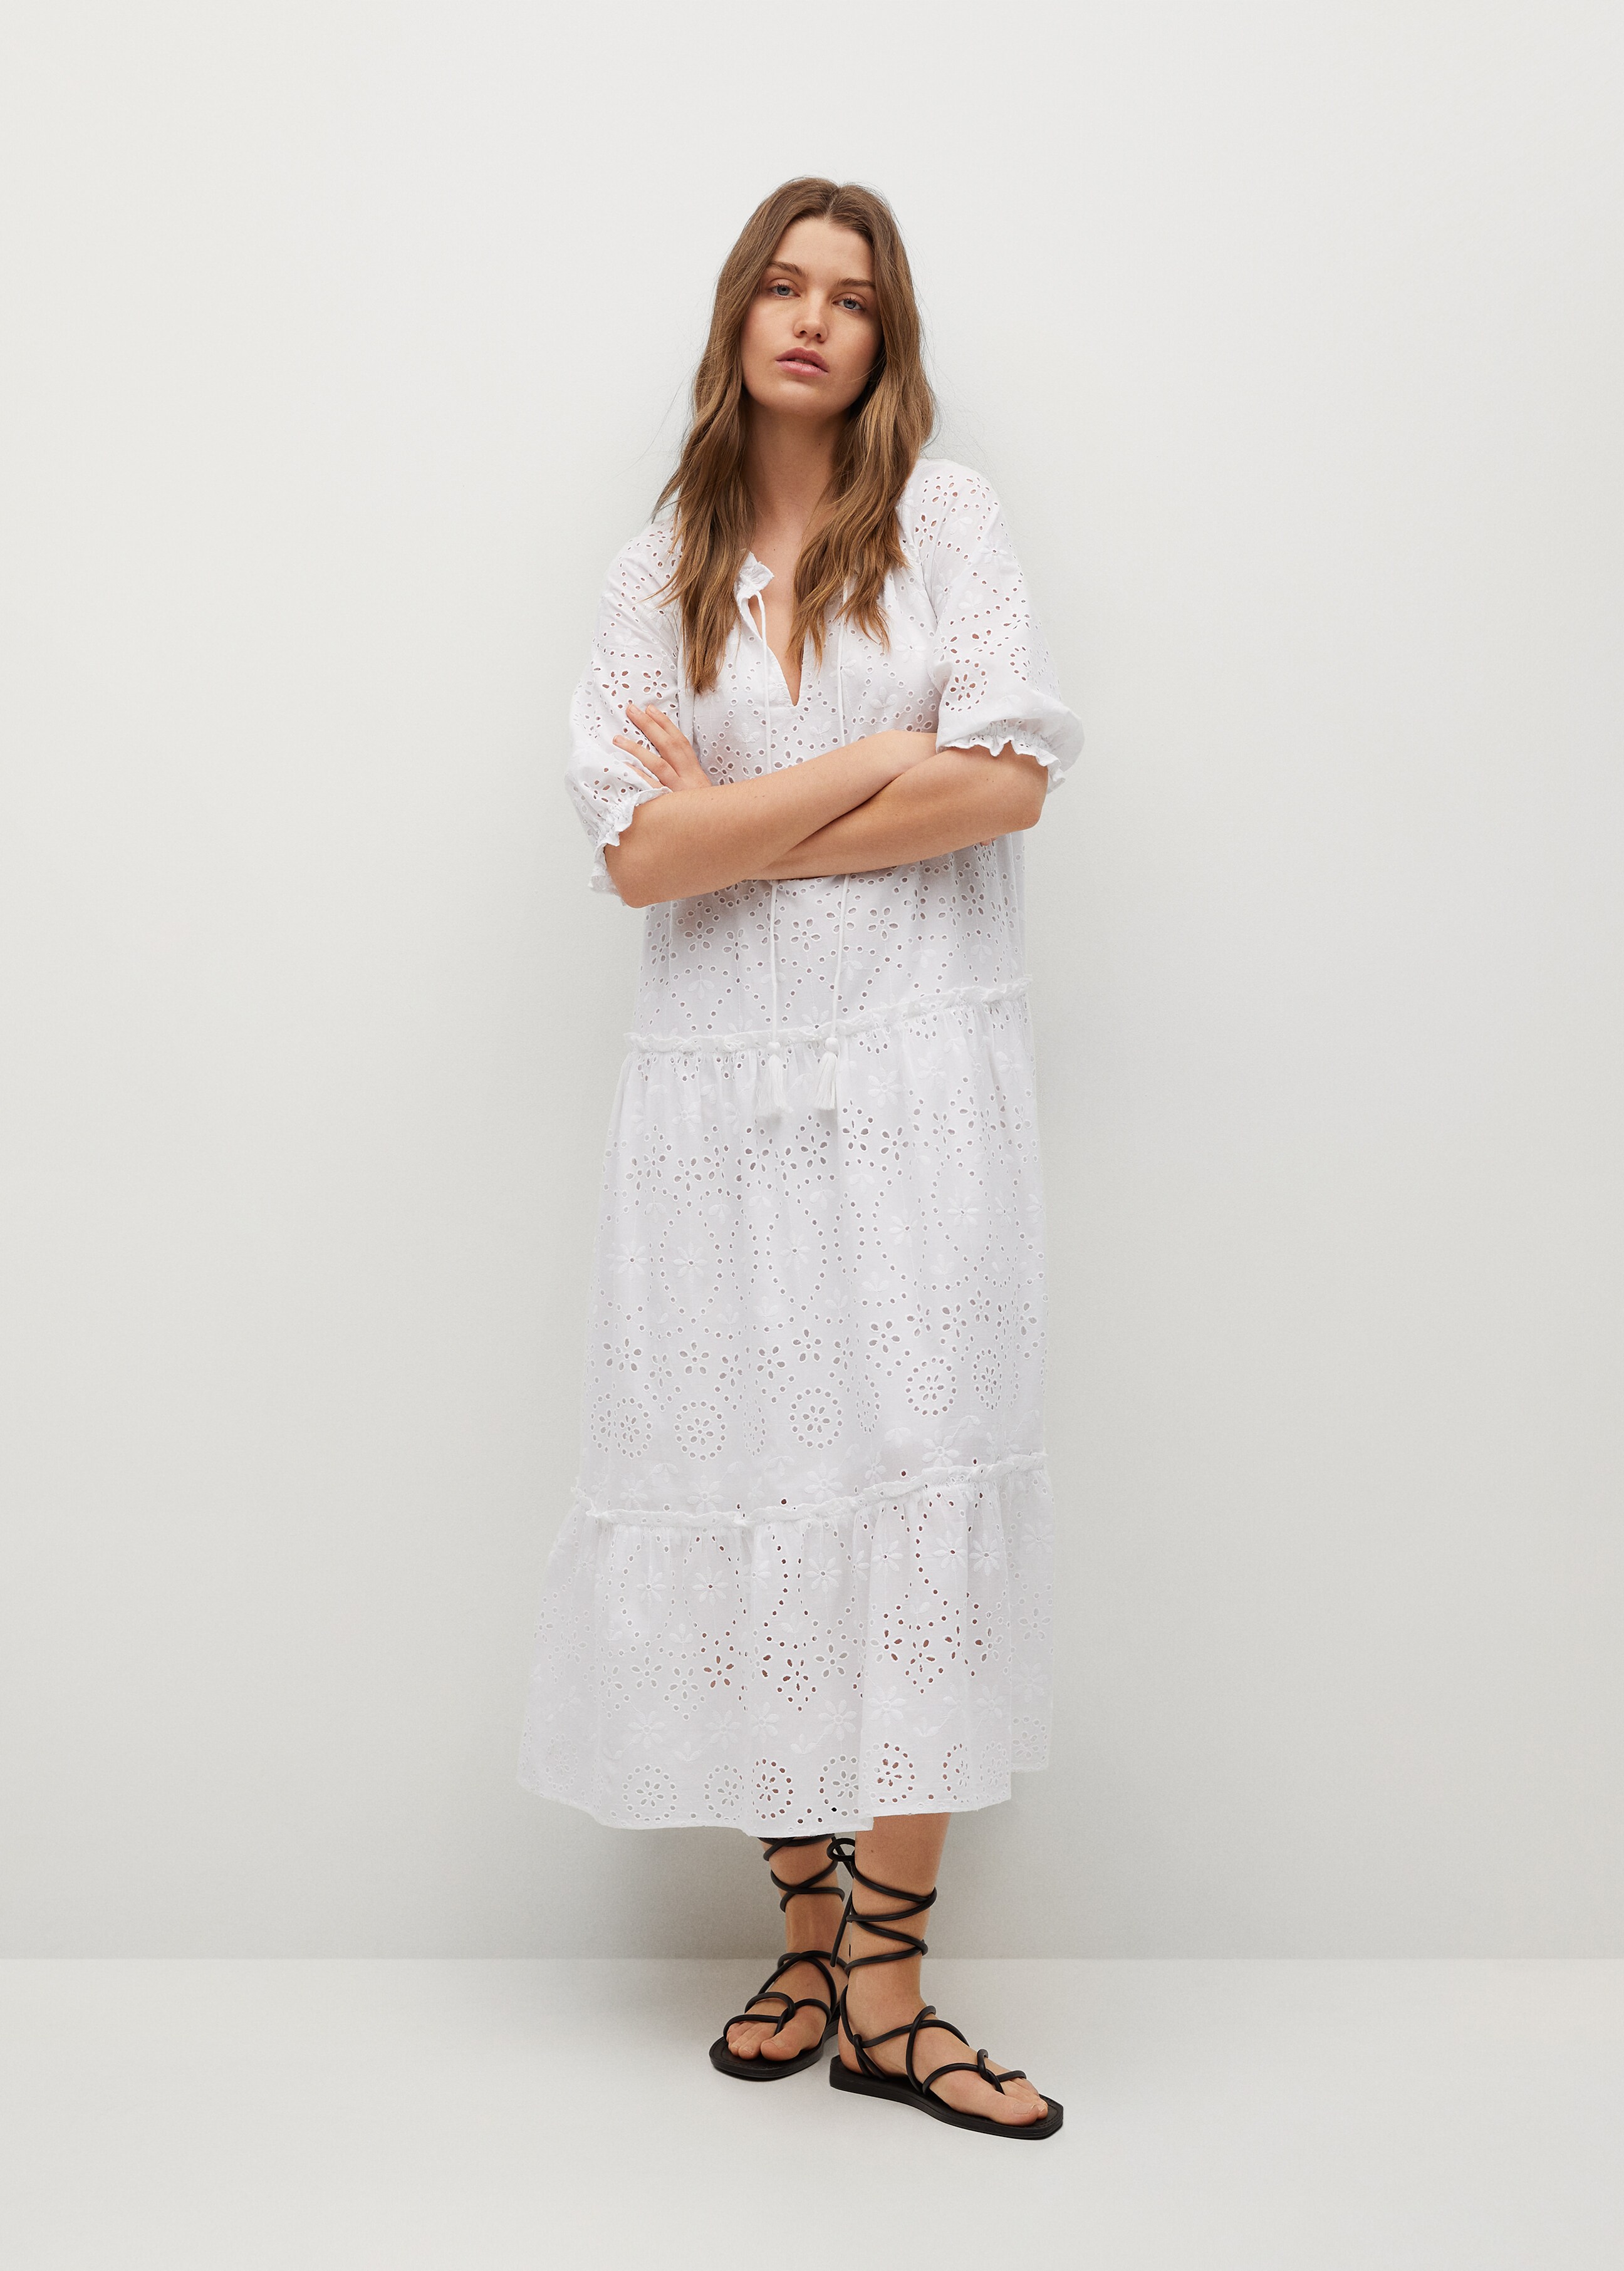 Broderie anglaise cotton dress - General plane